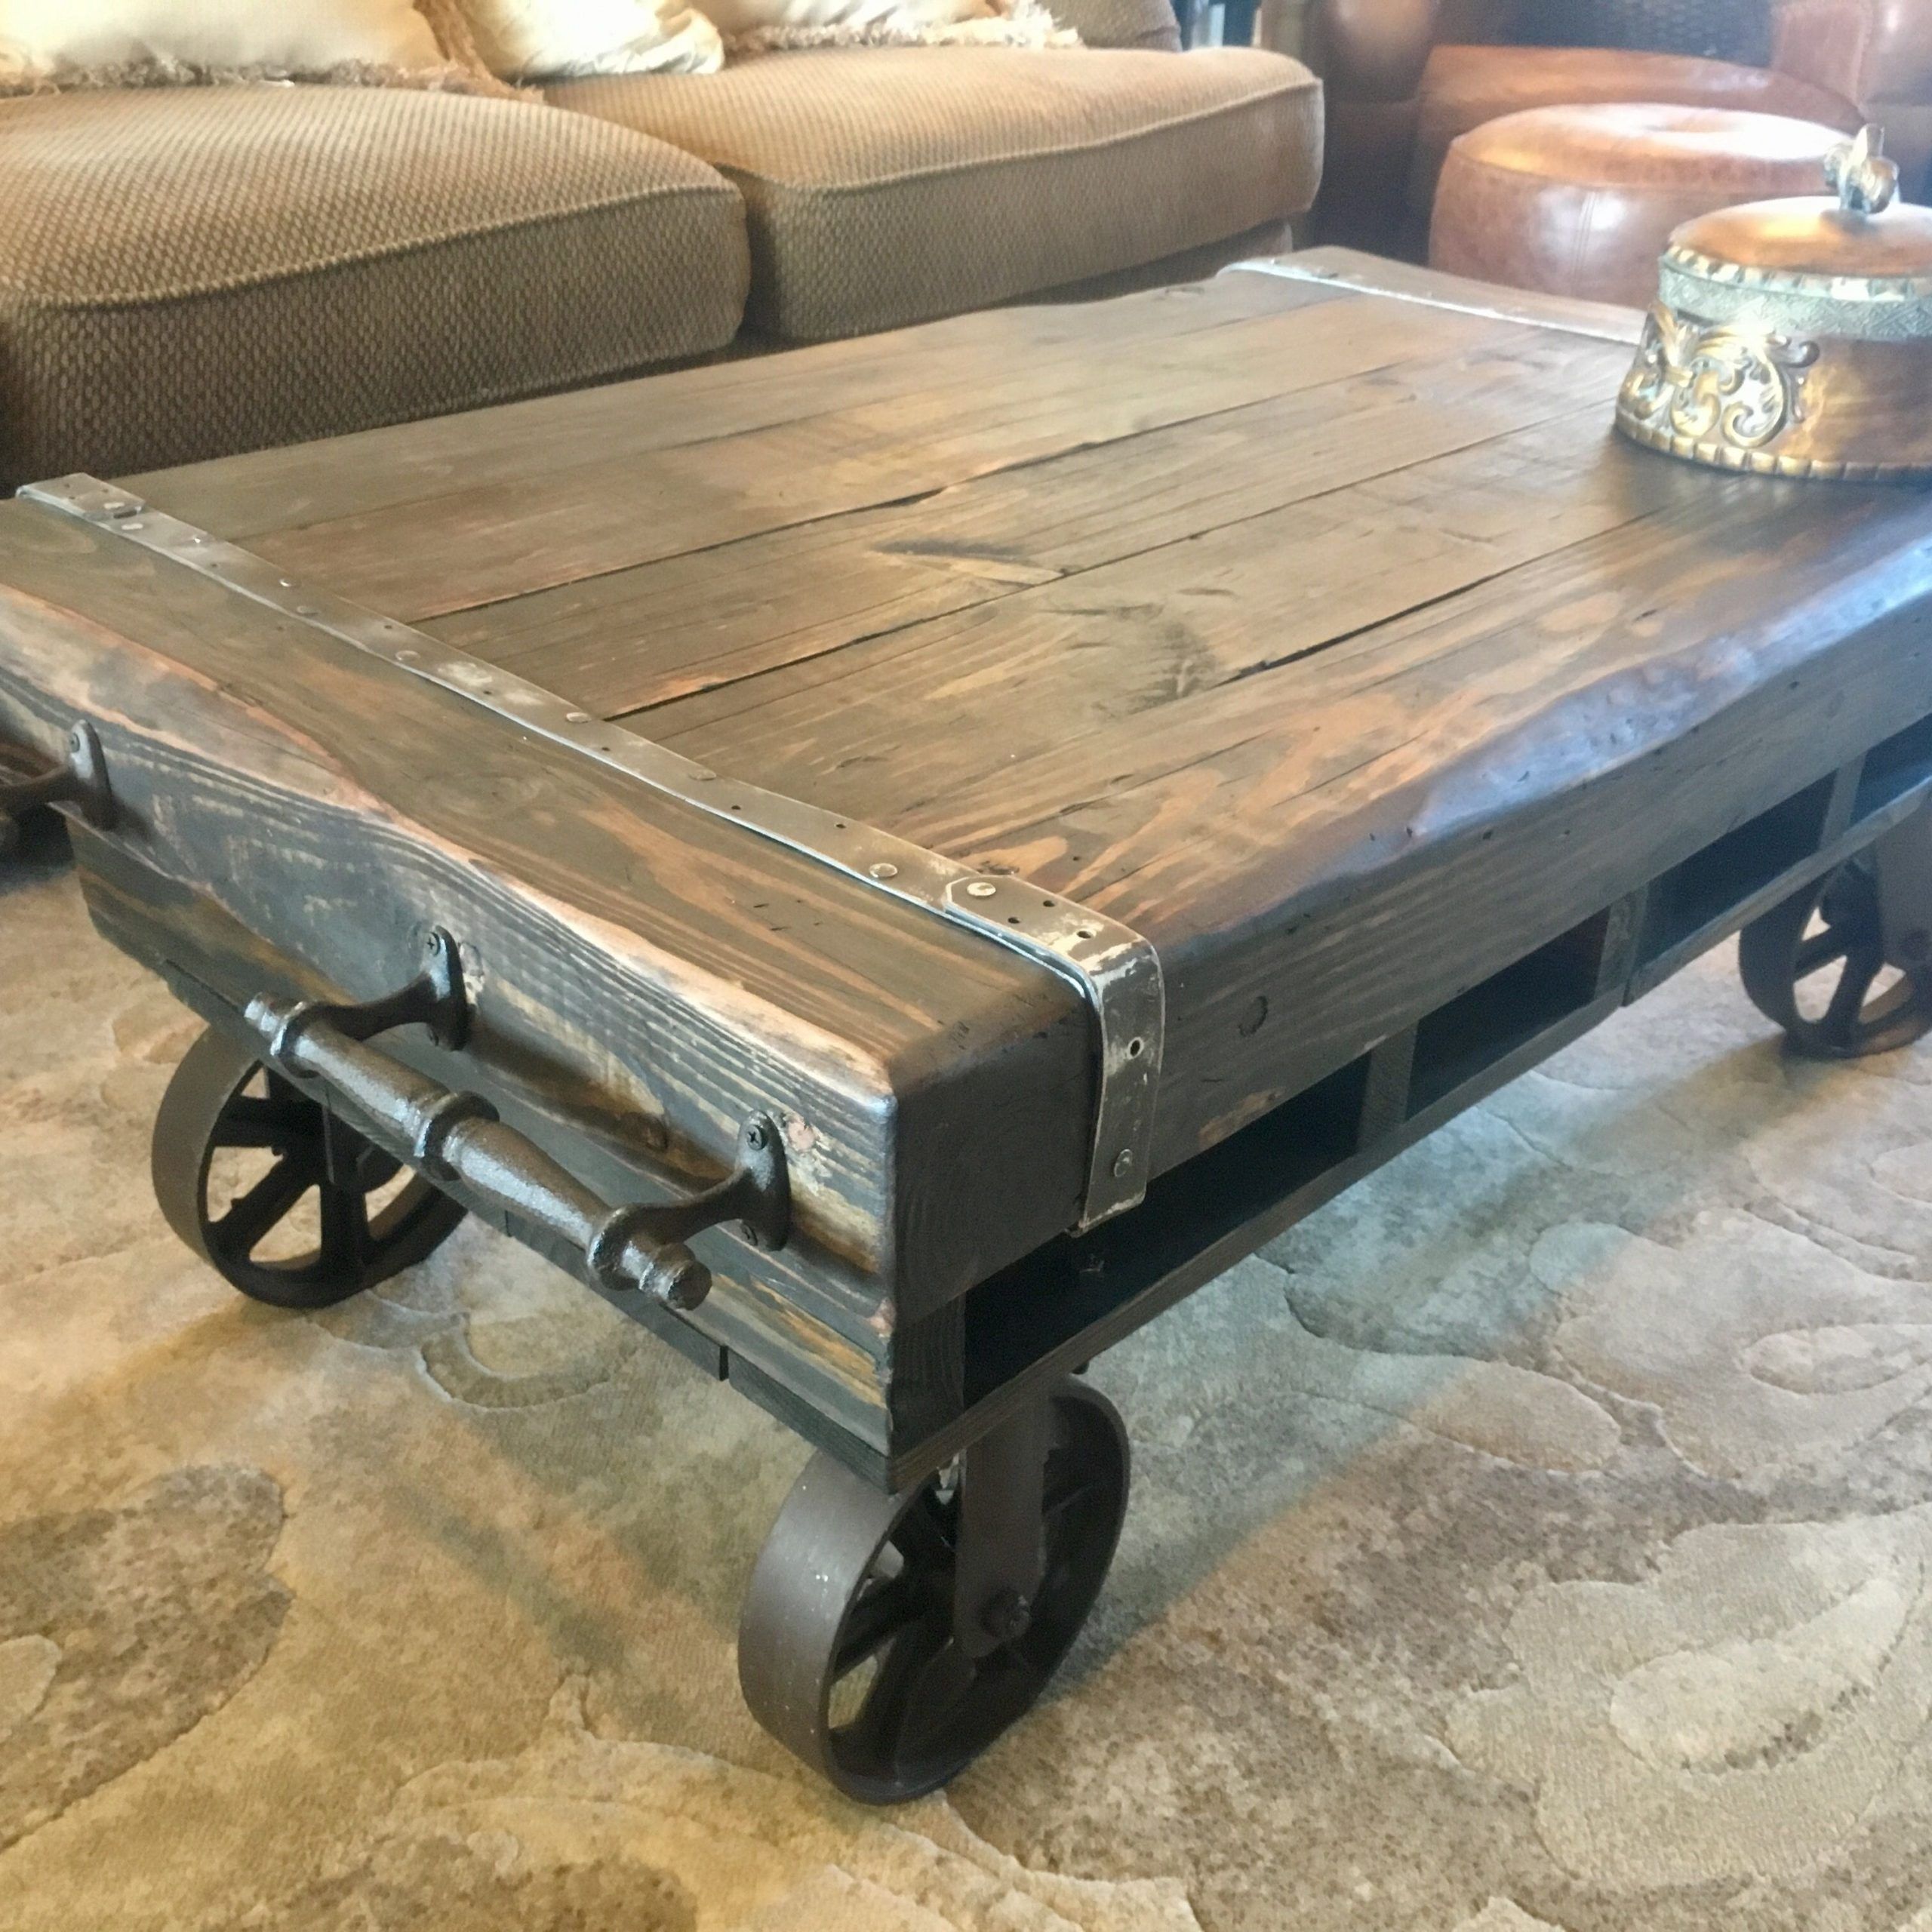 Rustic Factory Cart Coffee Table From Bacs Designs | Rustic Coffee Tables,  Industrial Style Coffee Table, Coffee Table With Regard To Coffee Tables With Casters (View 7 of 15)